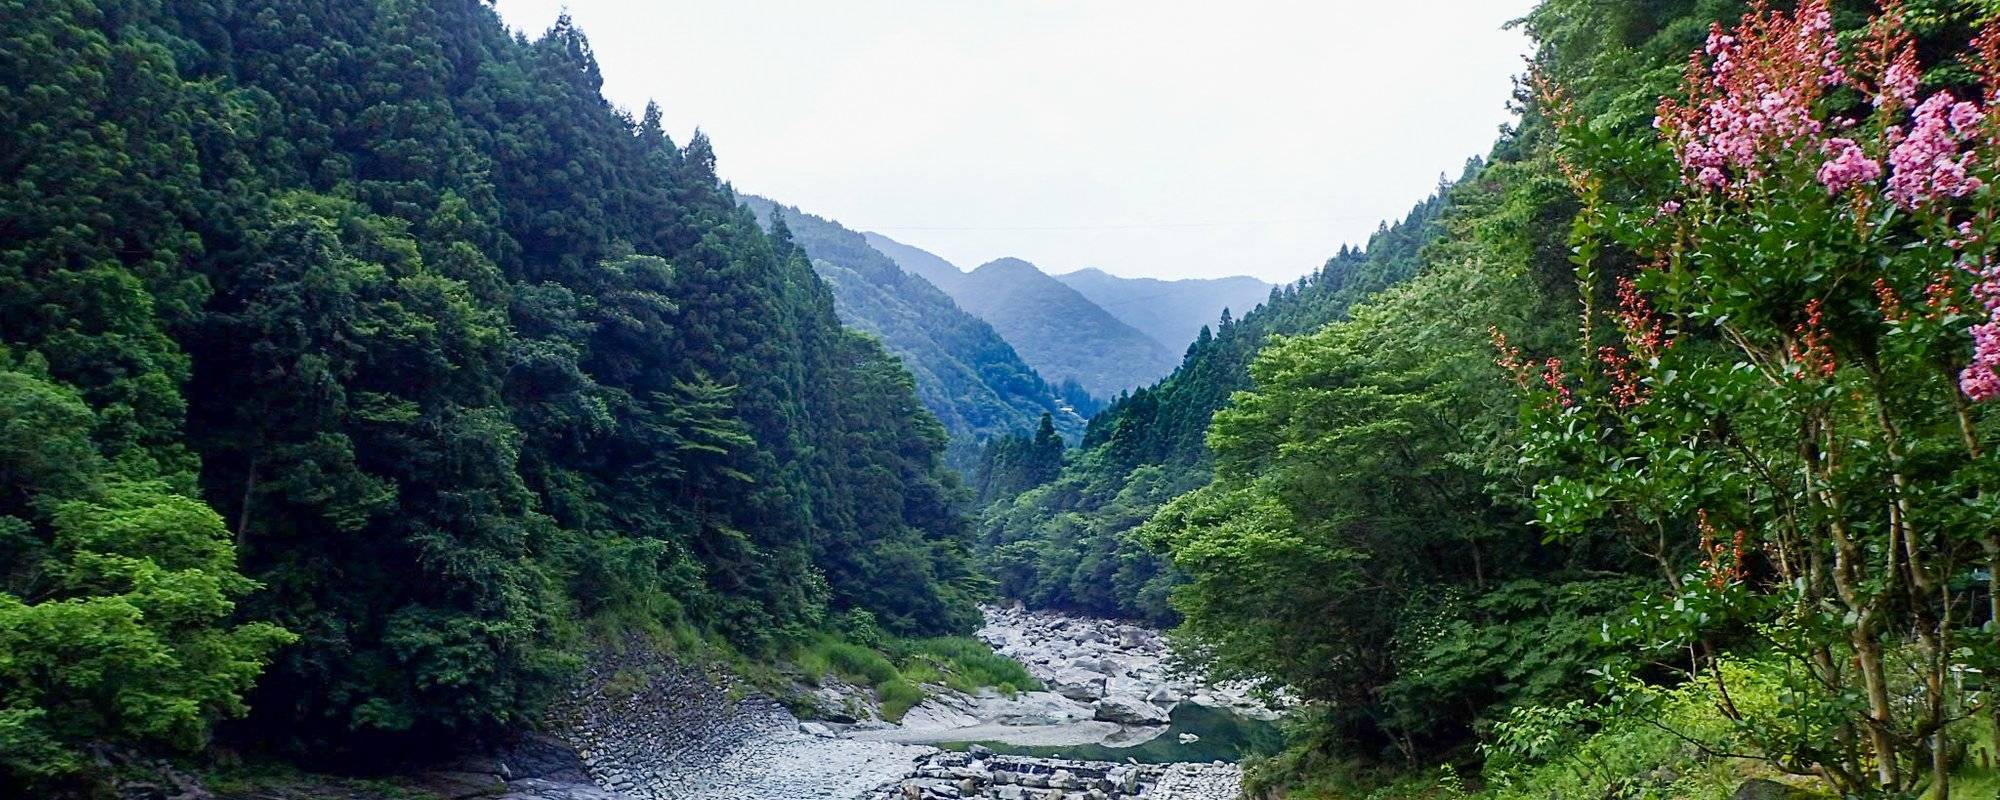 Iya Valley, Japan; Camping, Hiking, and Meeting the Resident Monsters!